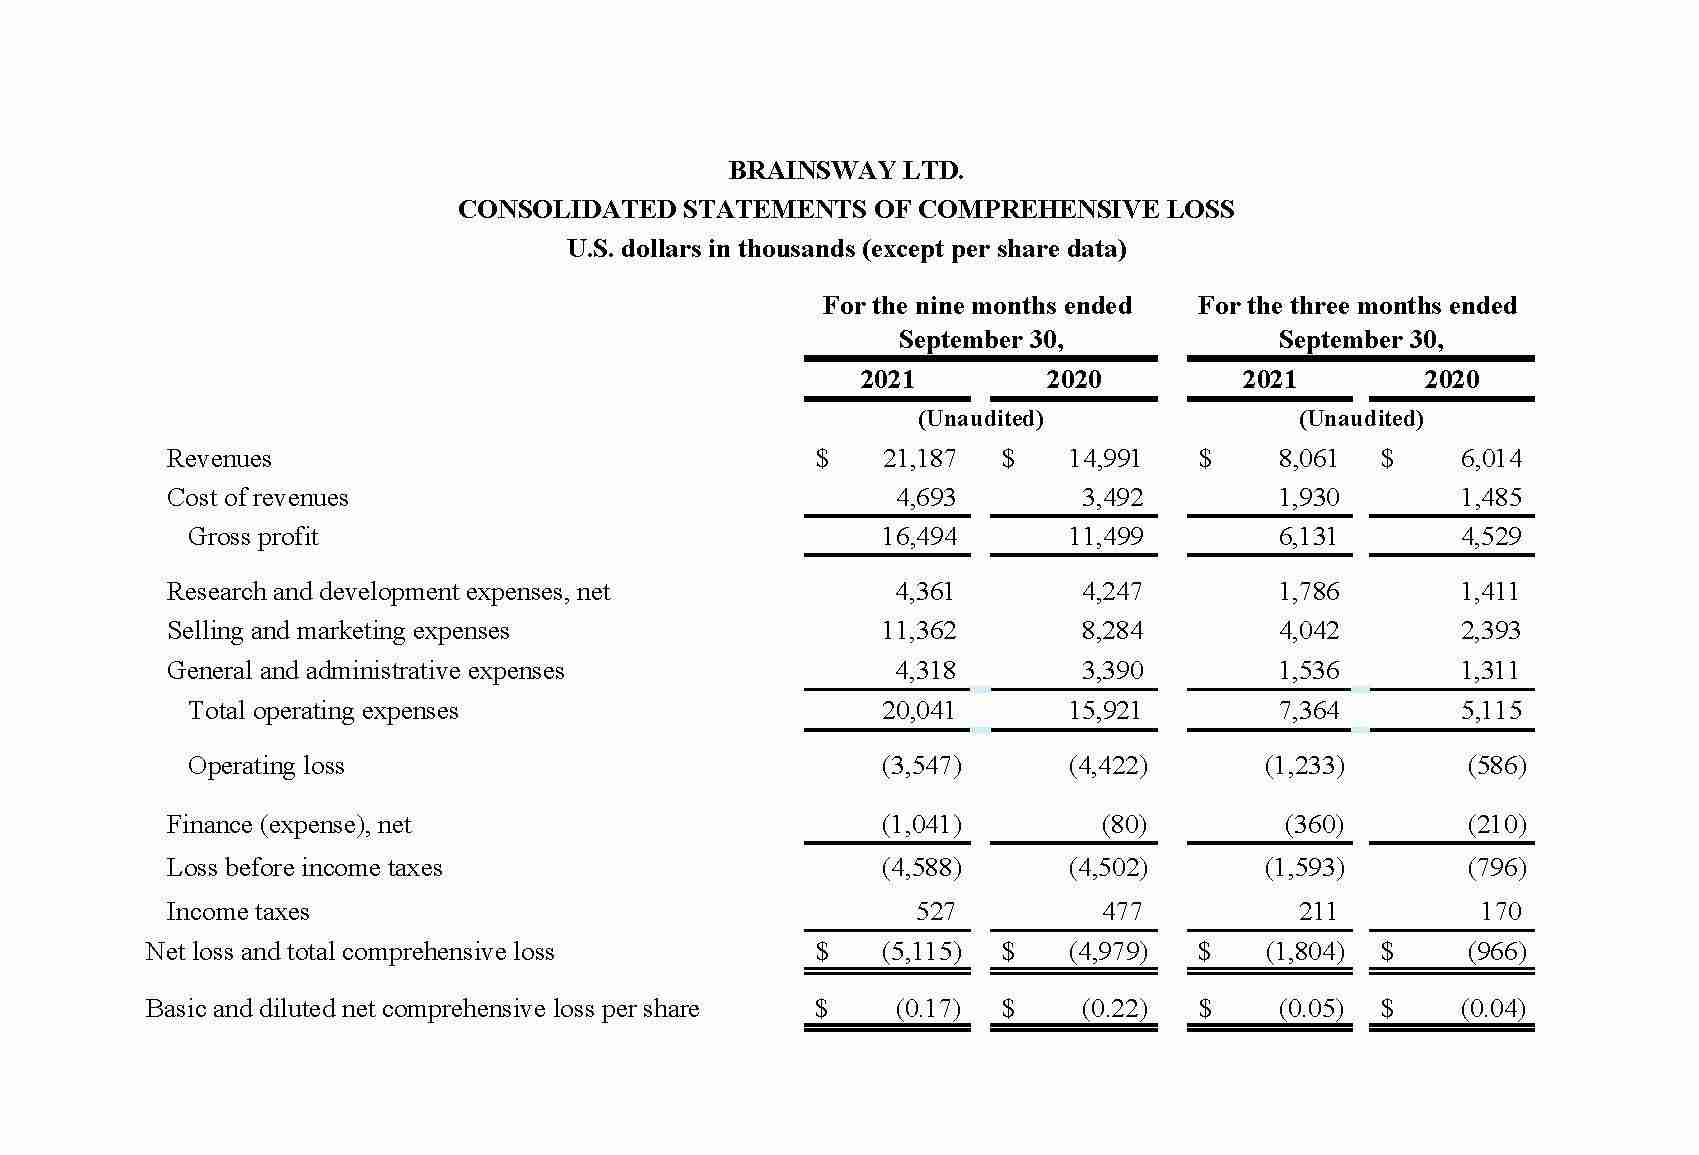 BrainsWay consolidated statement of Comprehensive Loss Third Quarter 2021